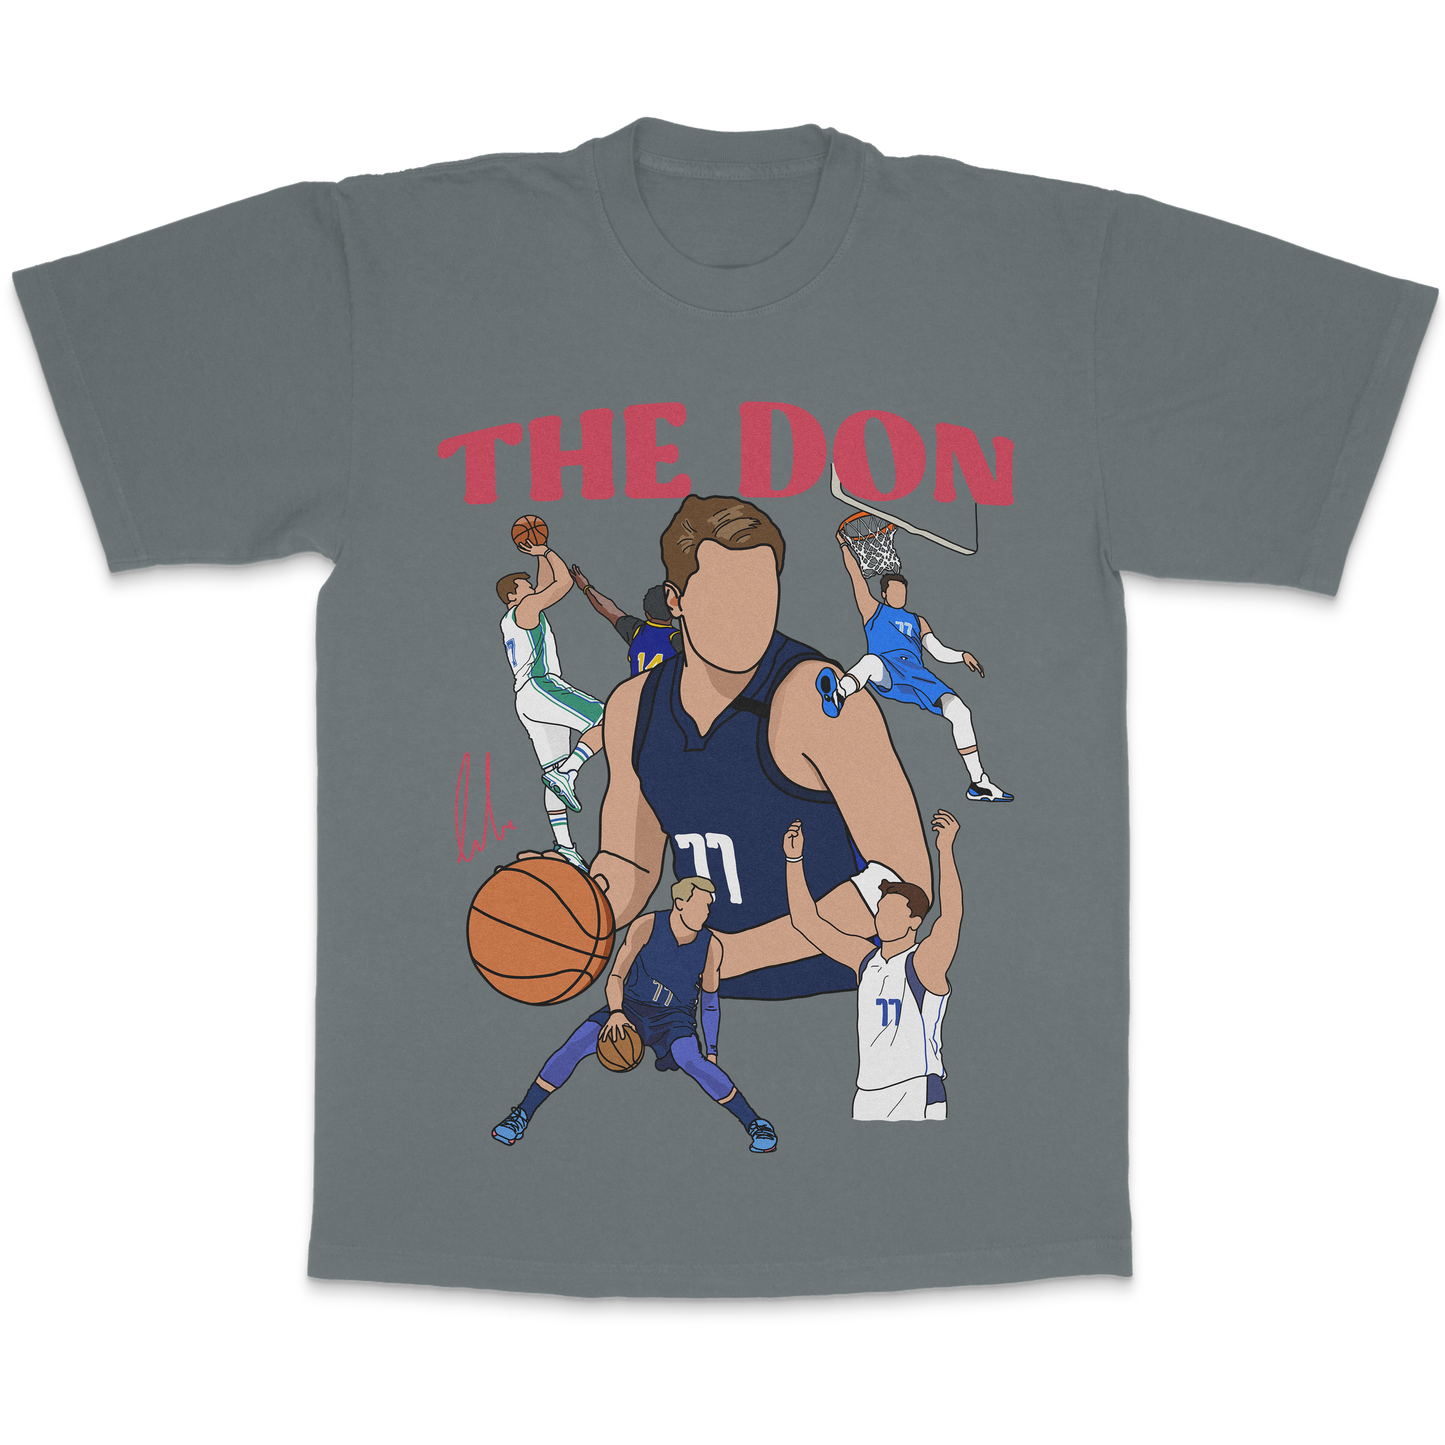 "THE DON" TEE